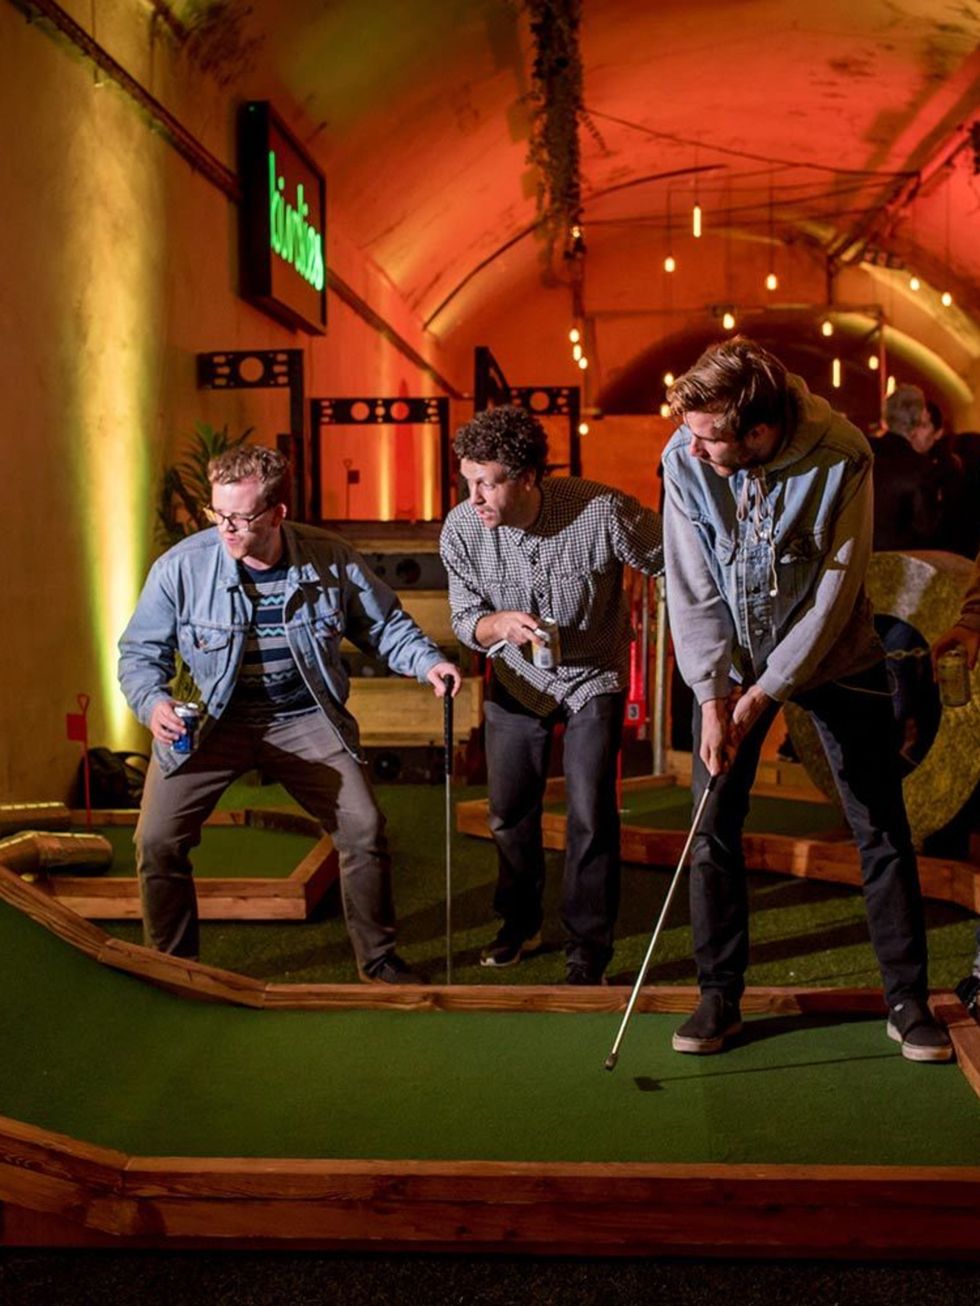 <p>POP-UP: Birdies Crazy Golf</p>

<p>Crazy golf. As anyone who spent their childhood holidays desperately trying to putt a neon golf ball up a volcano knows, it is surely one of our nation's finest contributions to the sporting world. Only now it's hippe